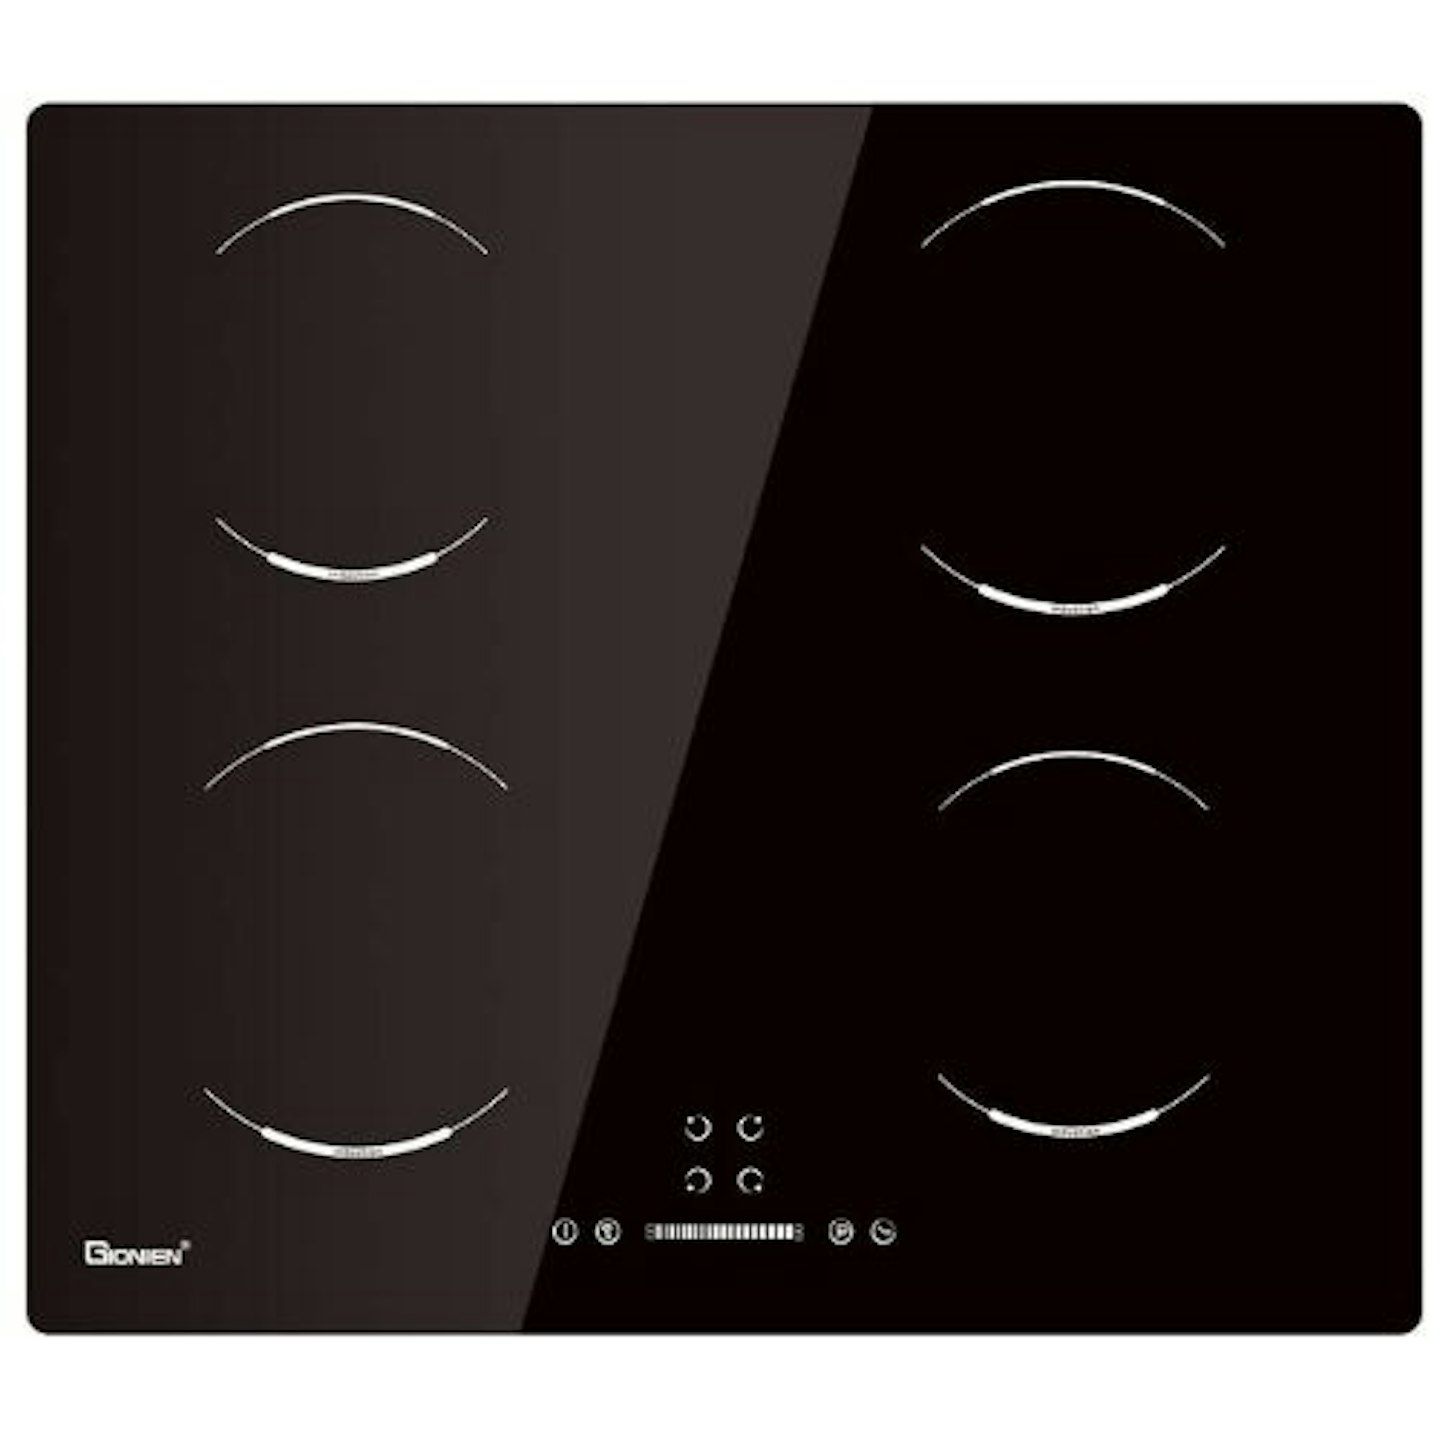 GIONIEN Induction Hob, 60cm Built in Electric Cooktop, GIB464SC